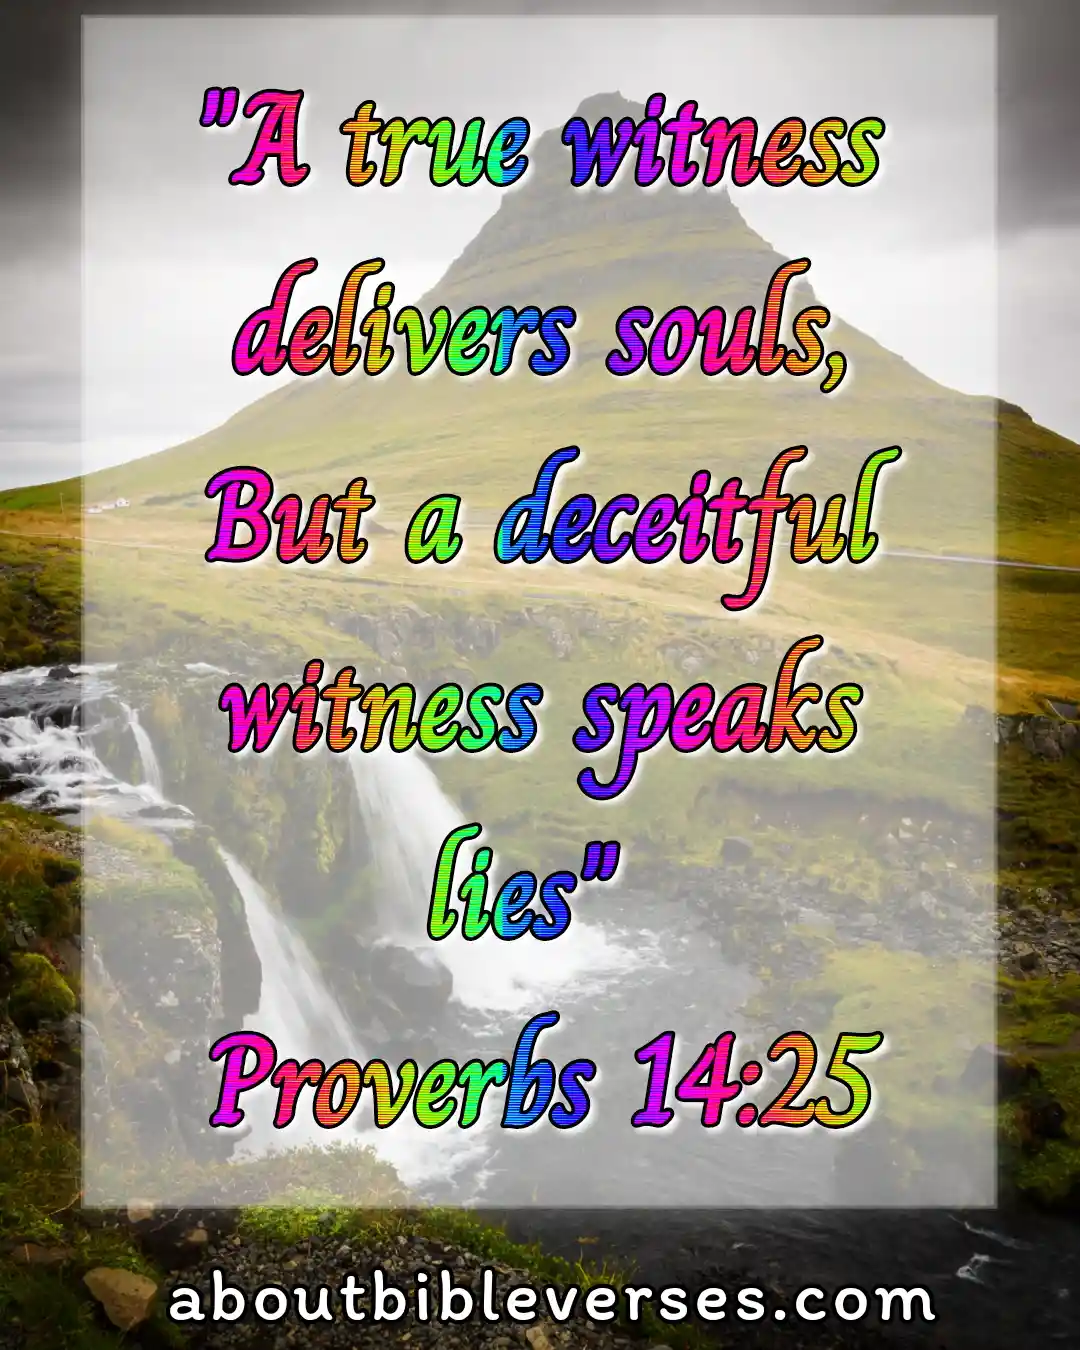 bible verses lying and deceit (Proverbs 14:25)